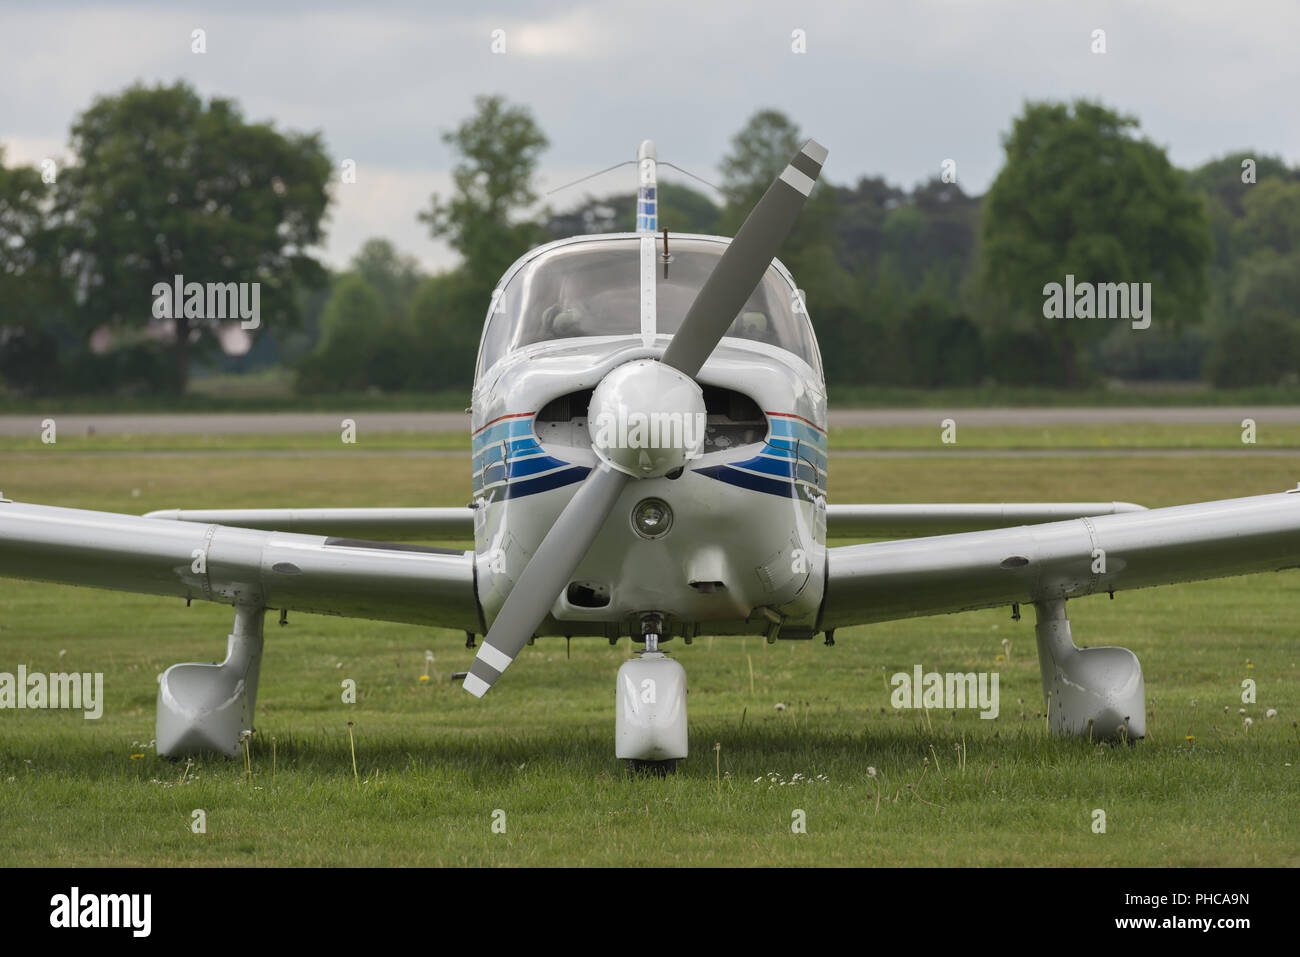 Front view of a plane on a lawn Stock Photo